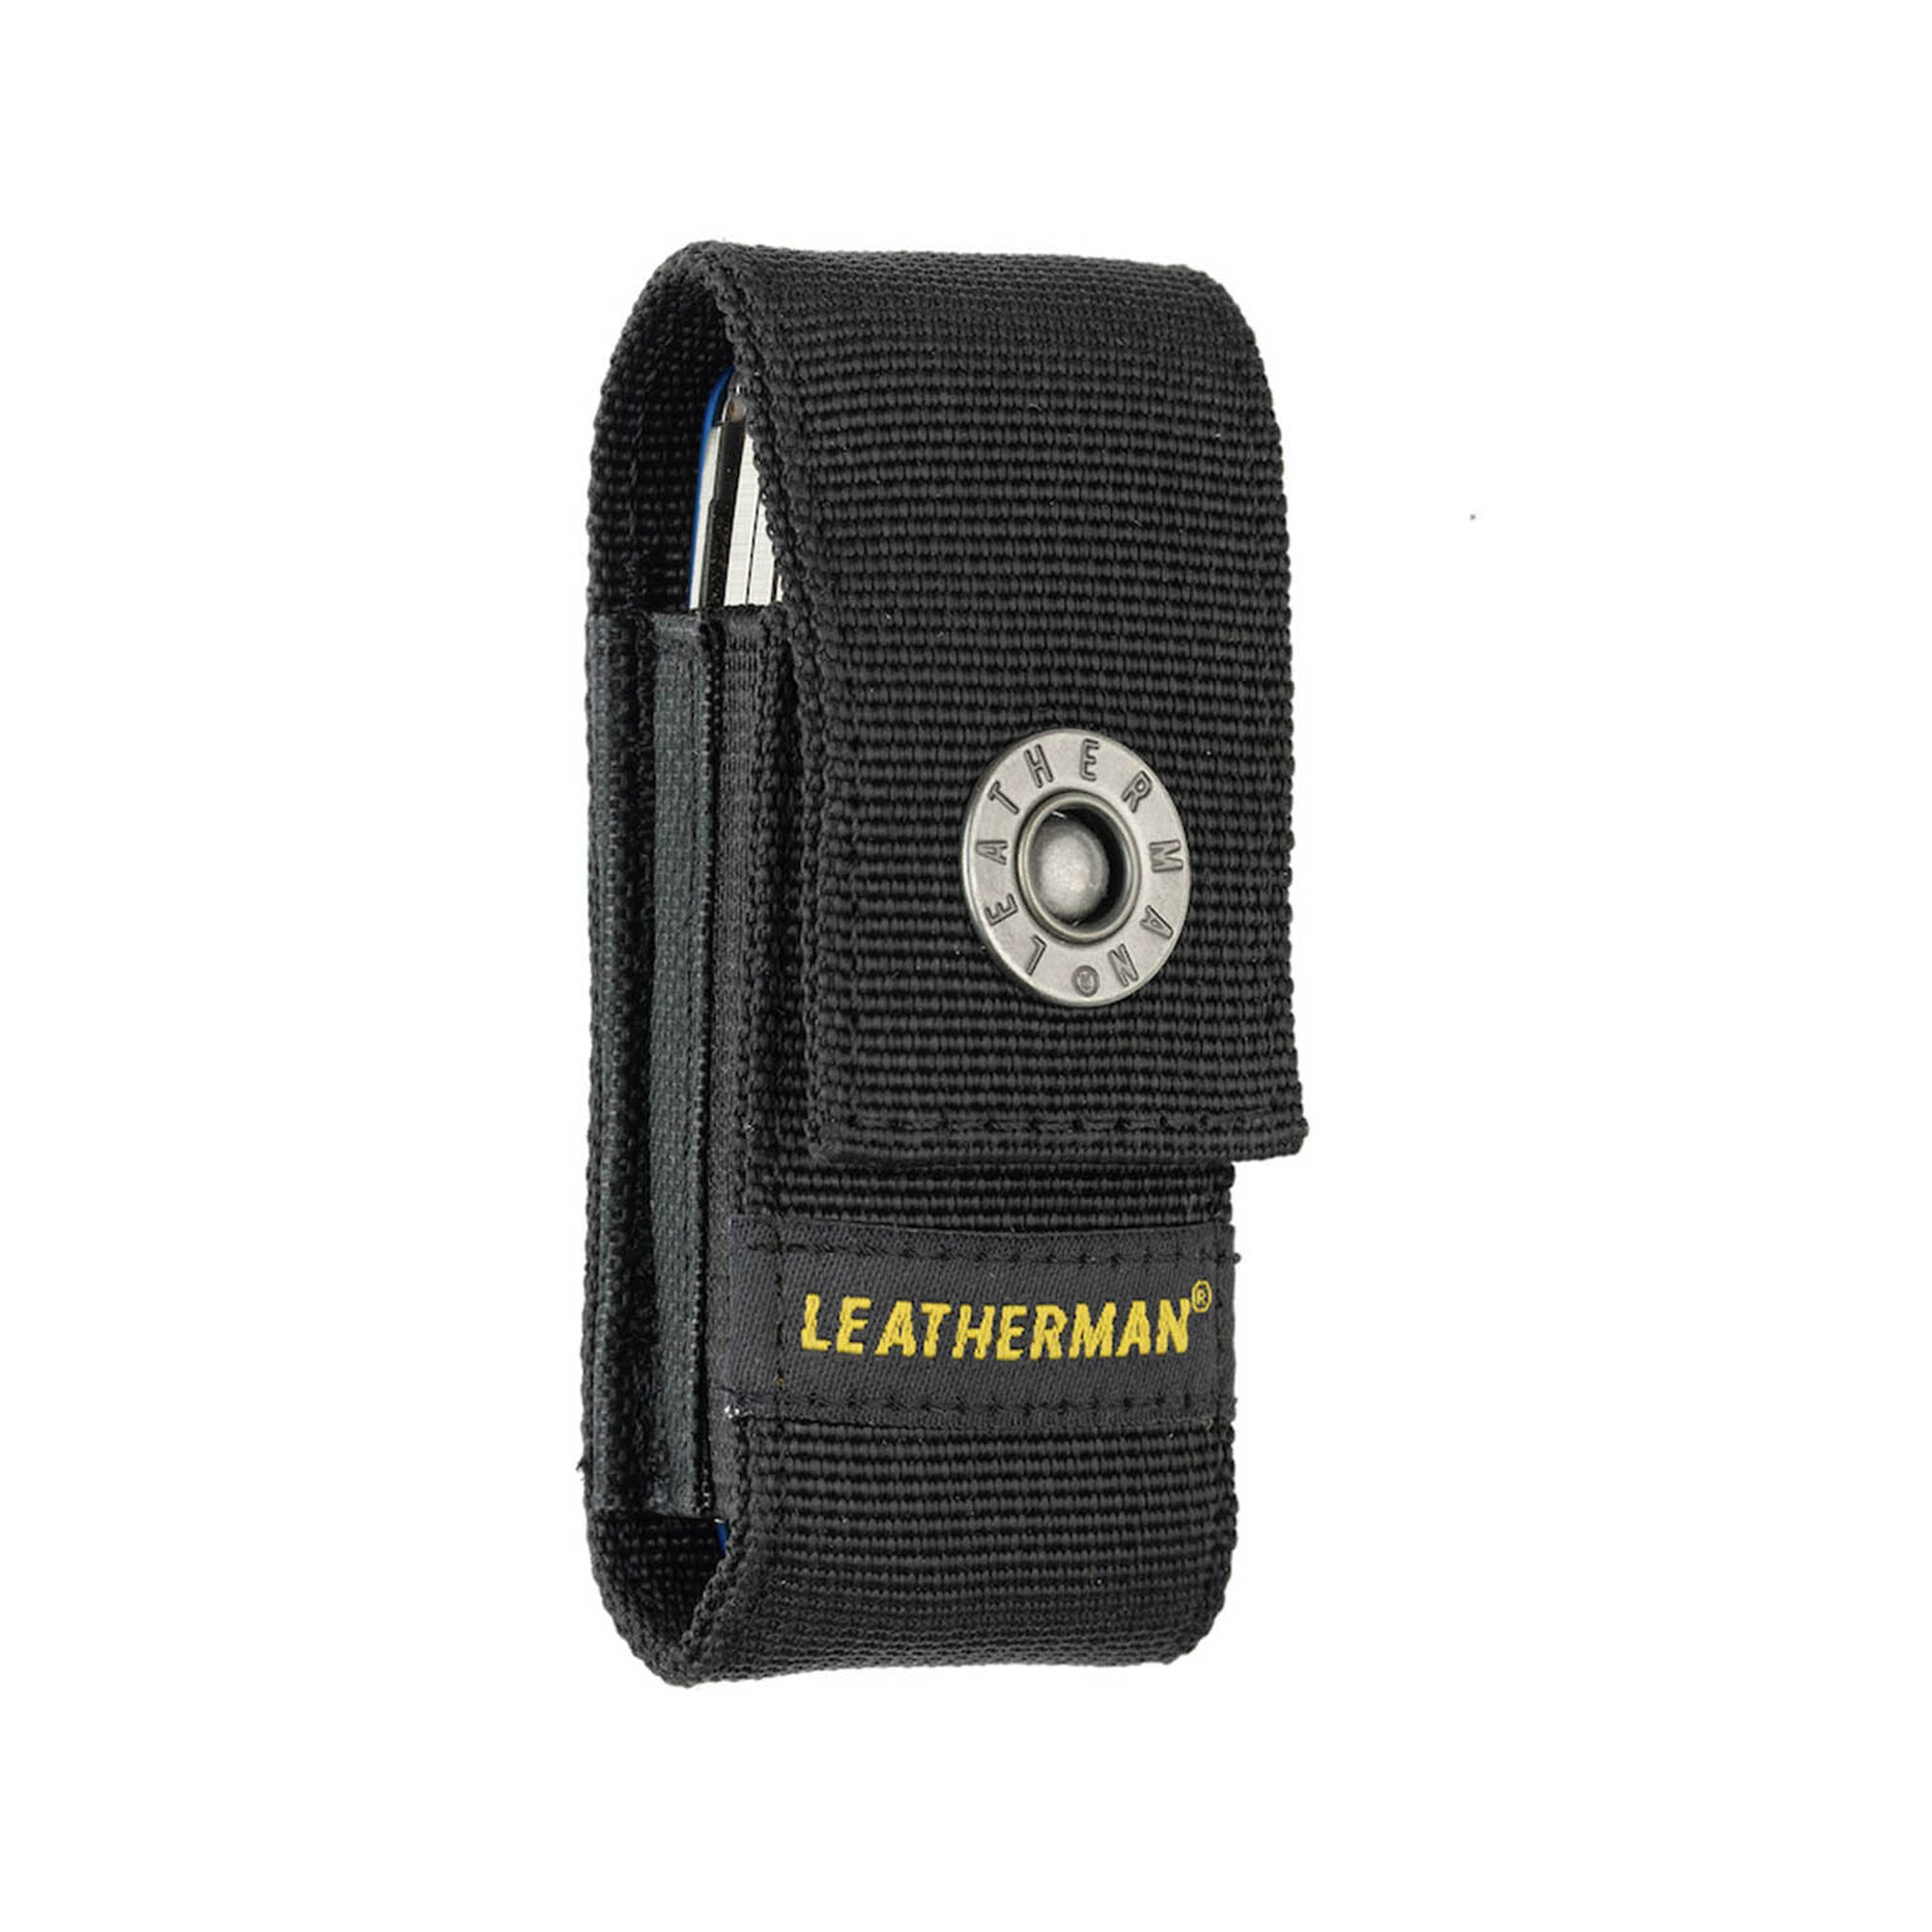 Sheath for Leatherman Wave Plus Space for Bit Kit and Bit Extension  Leatherman Skeletool Sheath Leather Case Personalized Knife Case 